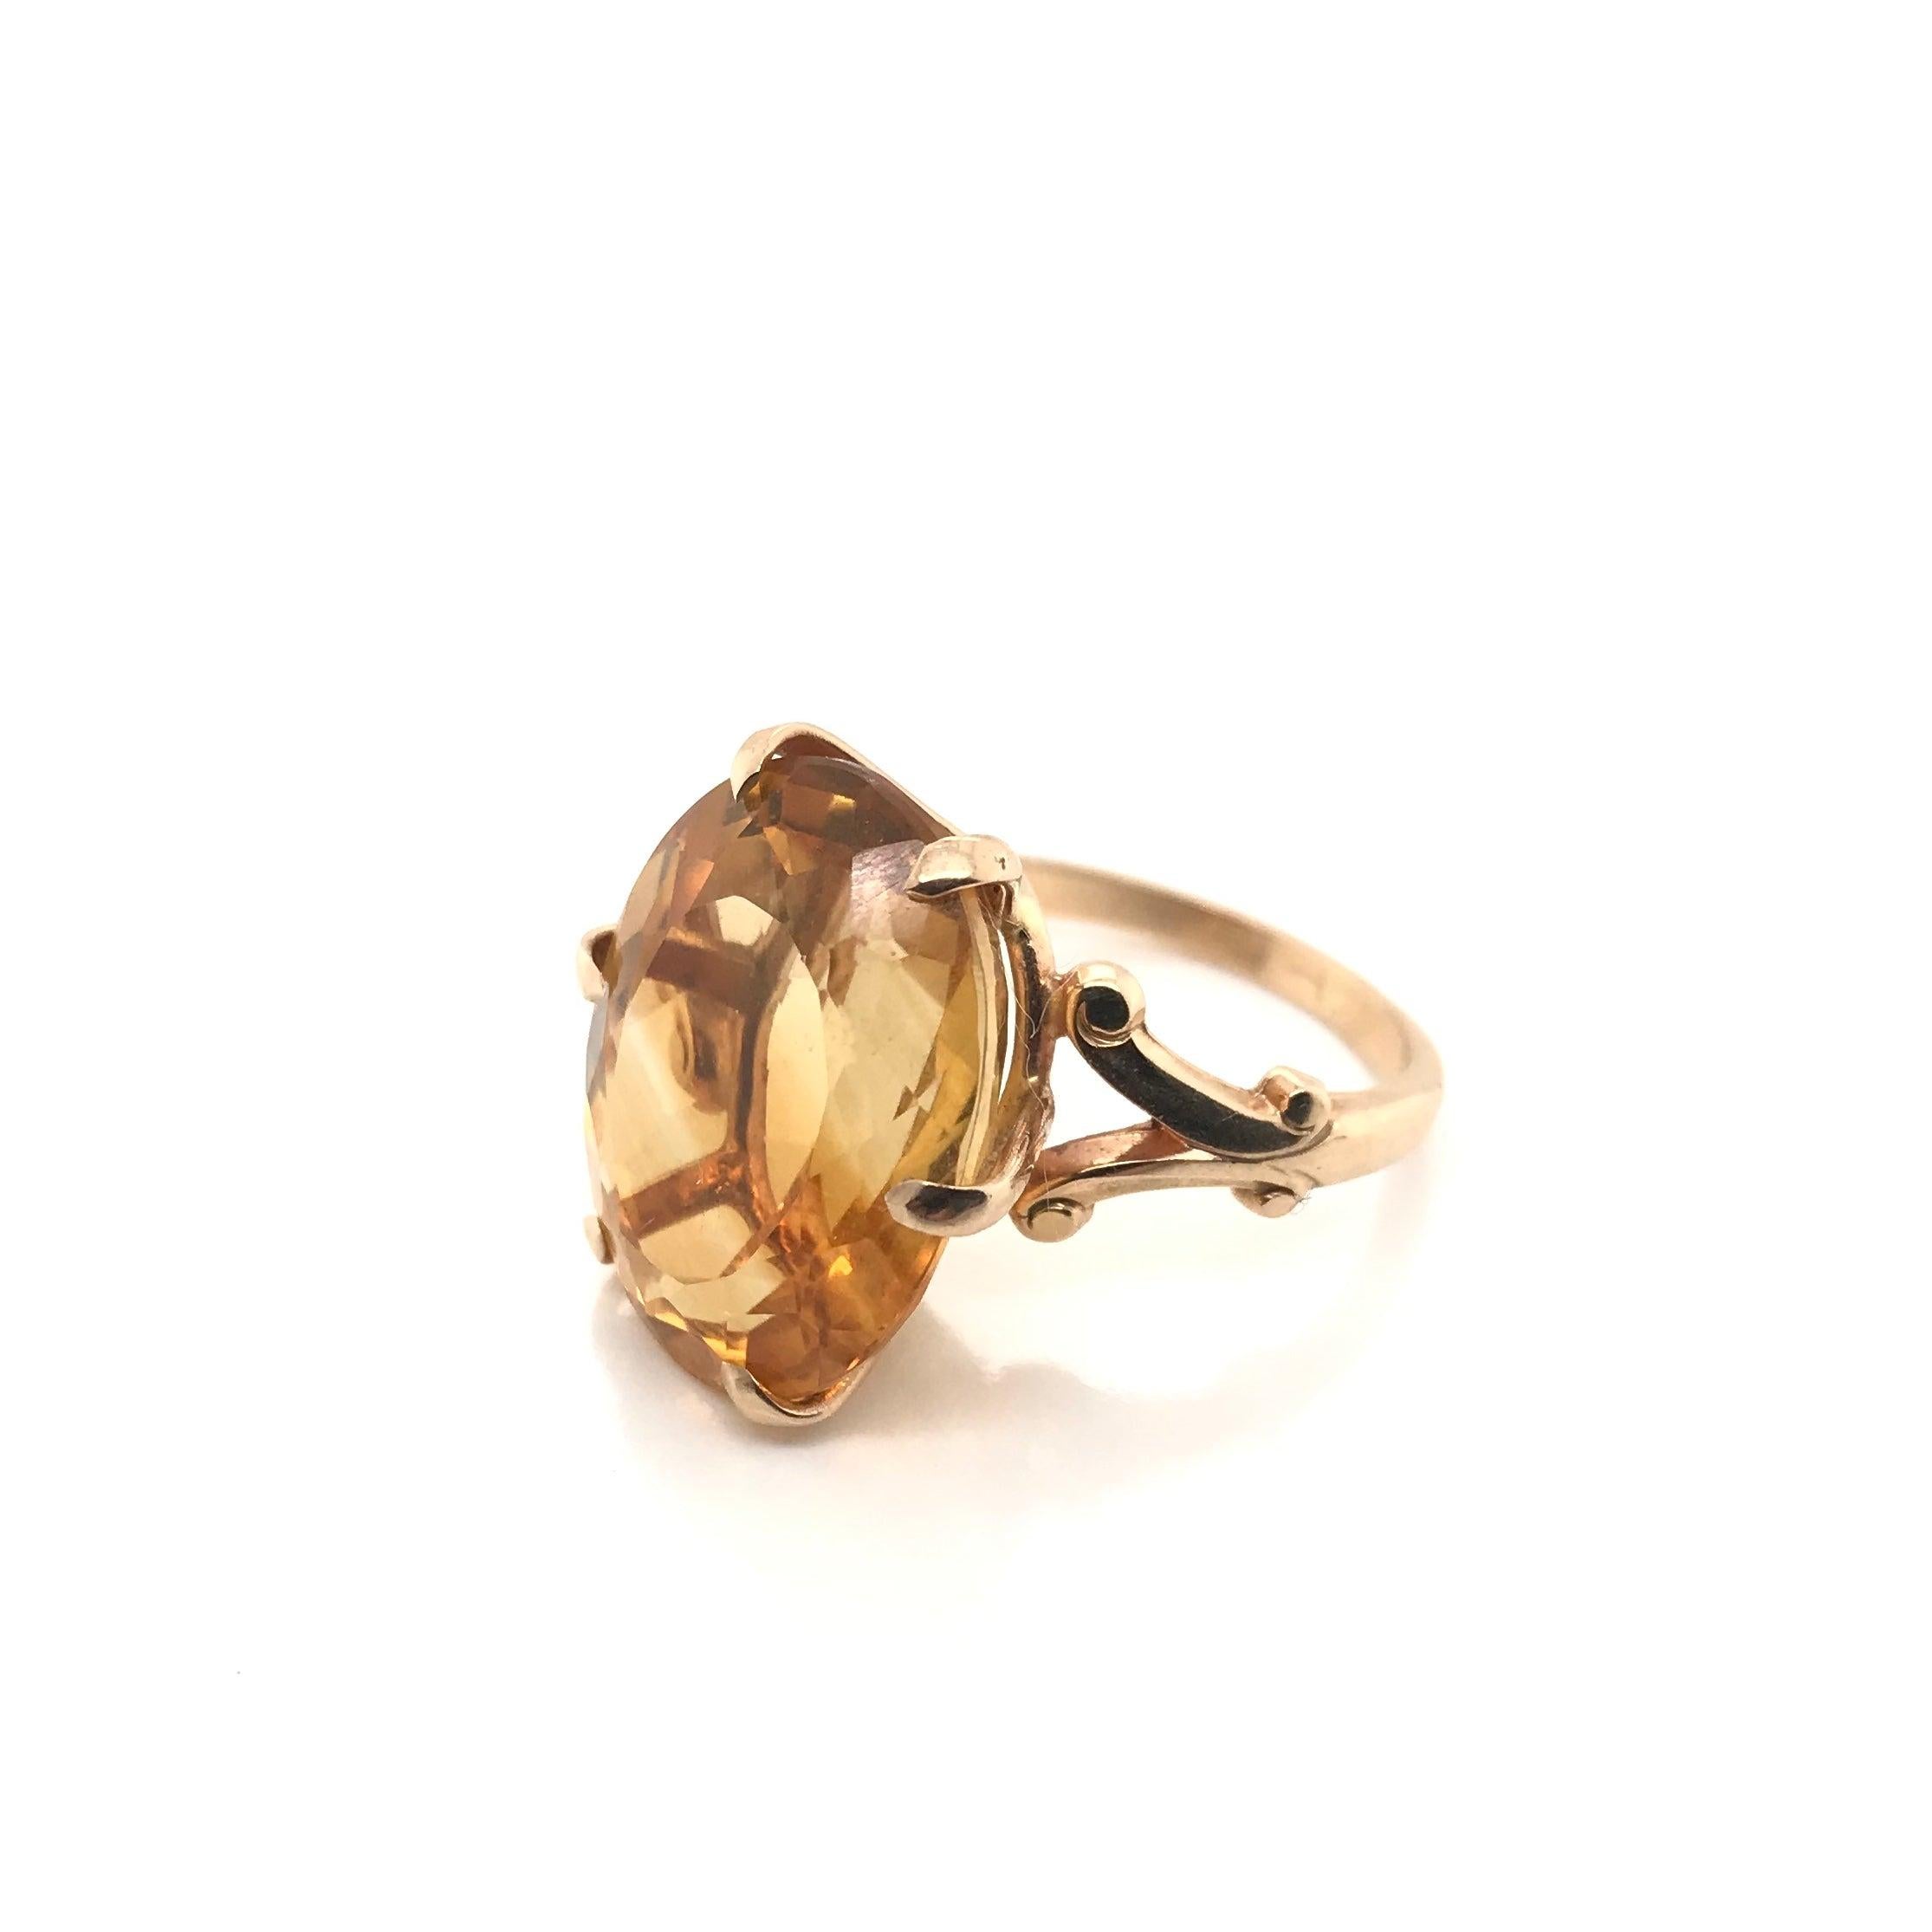 This stylish citrine cocktail ring was crafted sometime during the Mid Century design period (1940-1960). This retro piece features a large and fancy cut center Citrine secured by 6 claw prongs. The setting is 14K gold and features a stylized